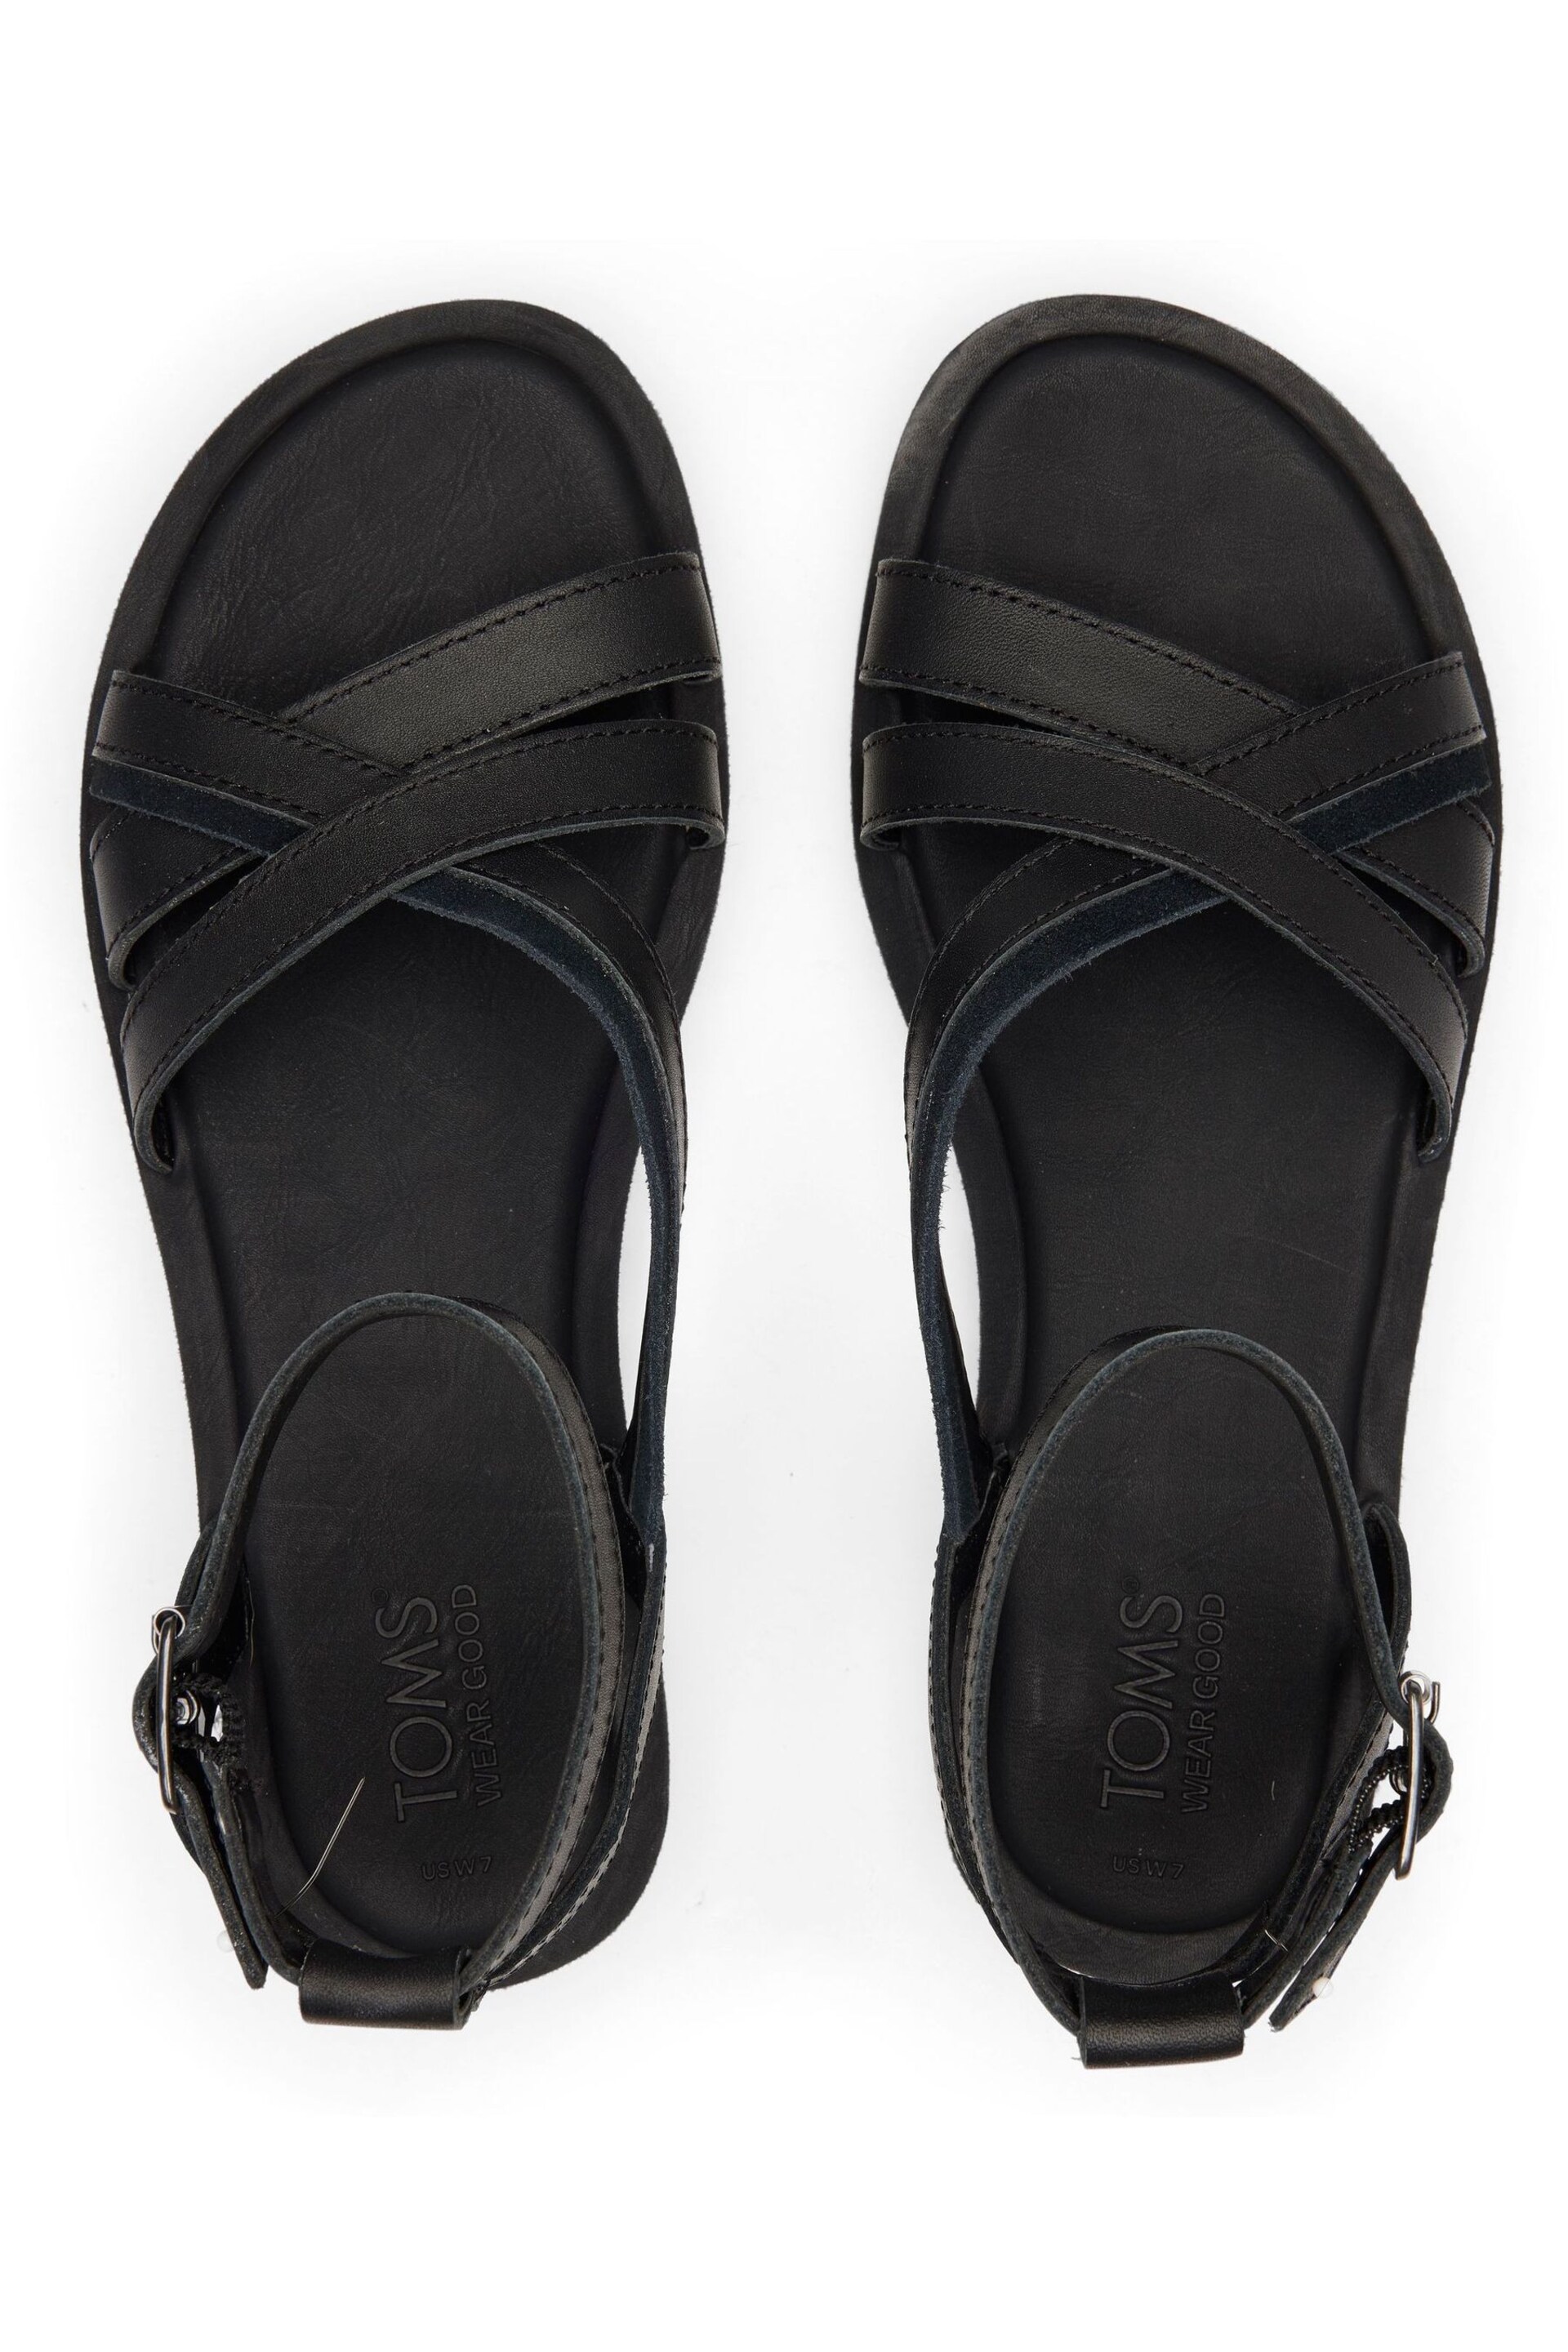 TOMS Rory Black Sandals In Leather And Suede - Image 4 of 5